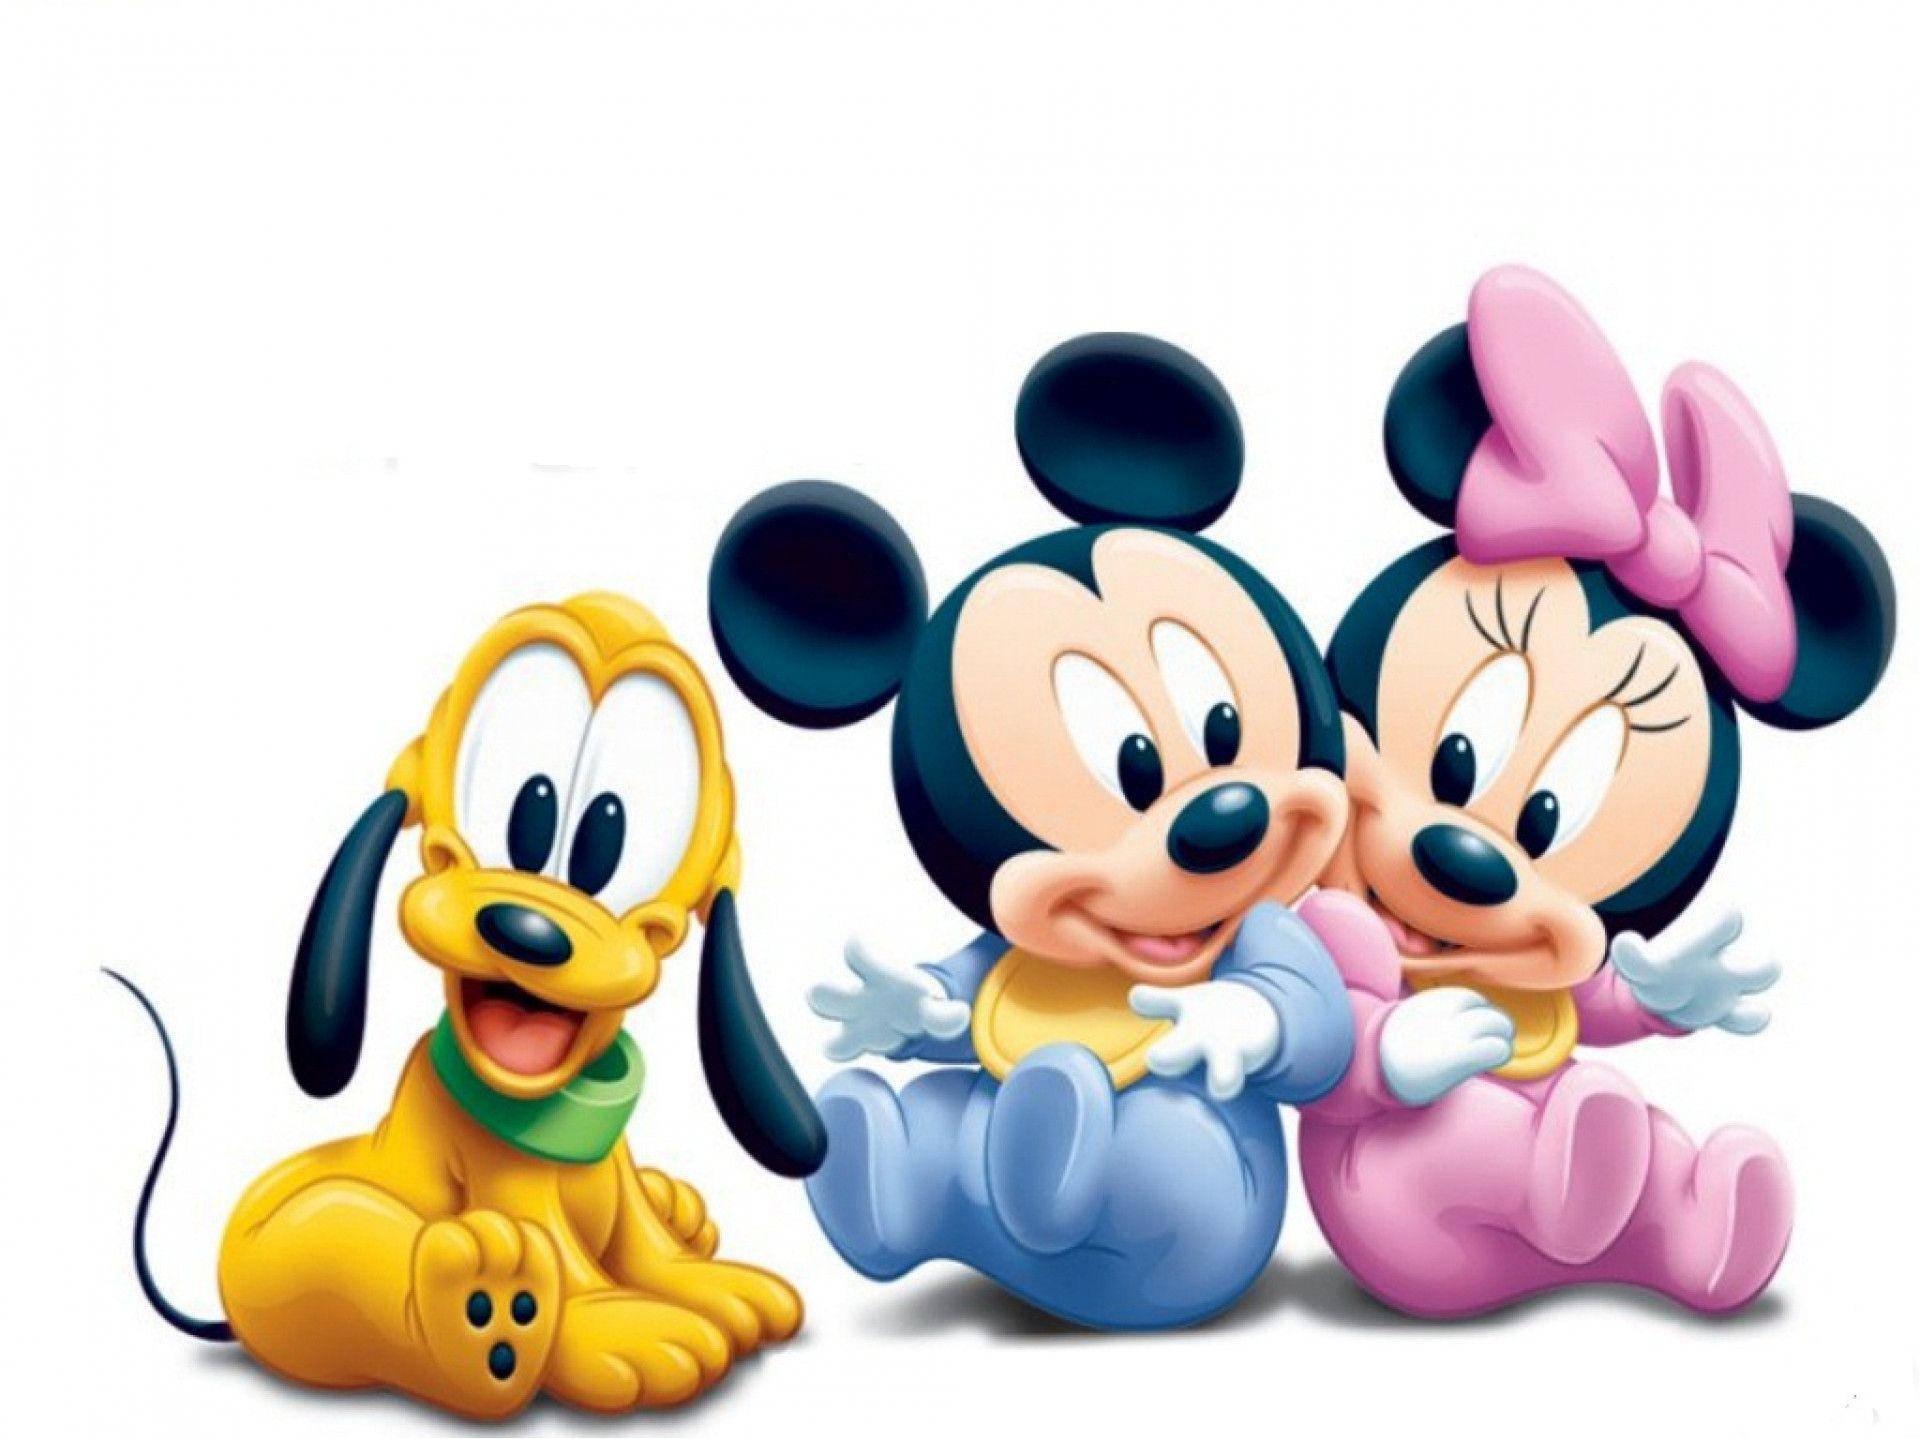 Free Mickey Wallpaper Downloads [400] Mickey Wallpapers for FREE